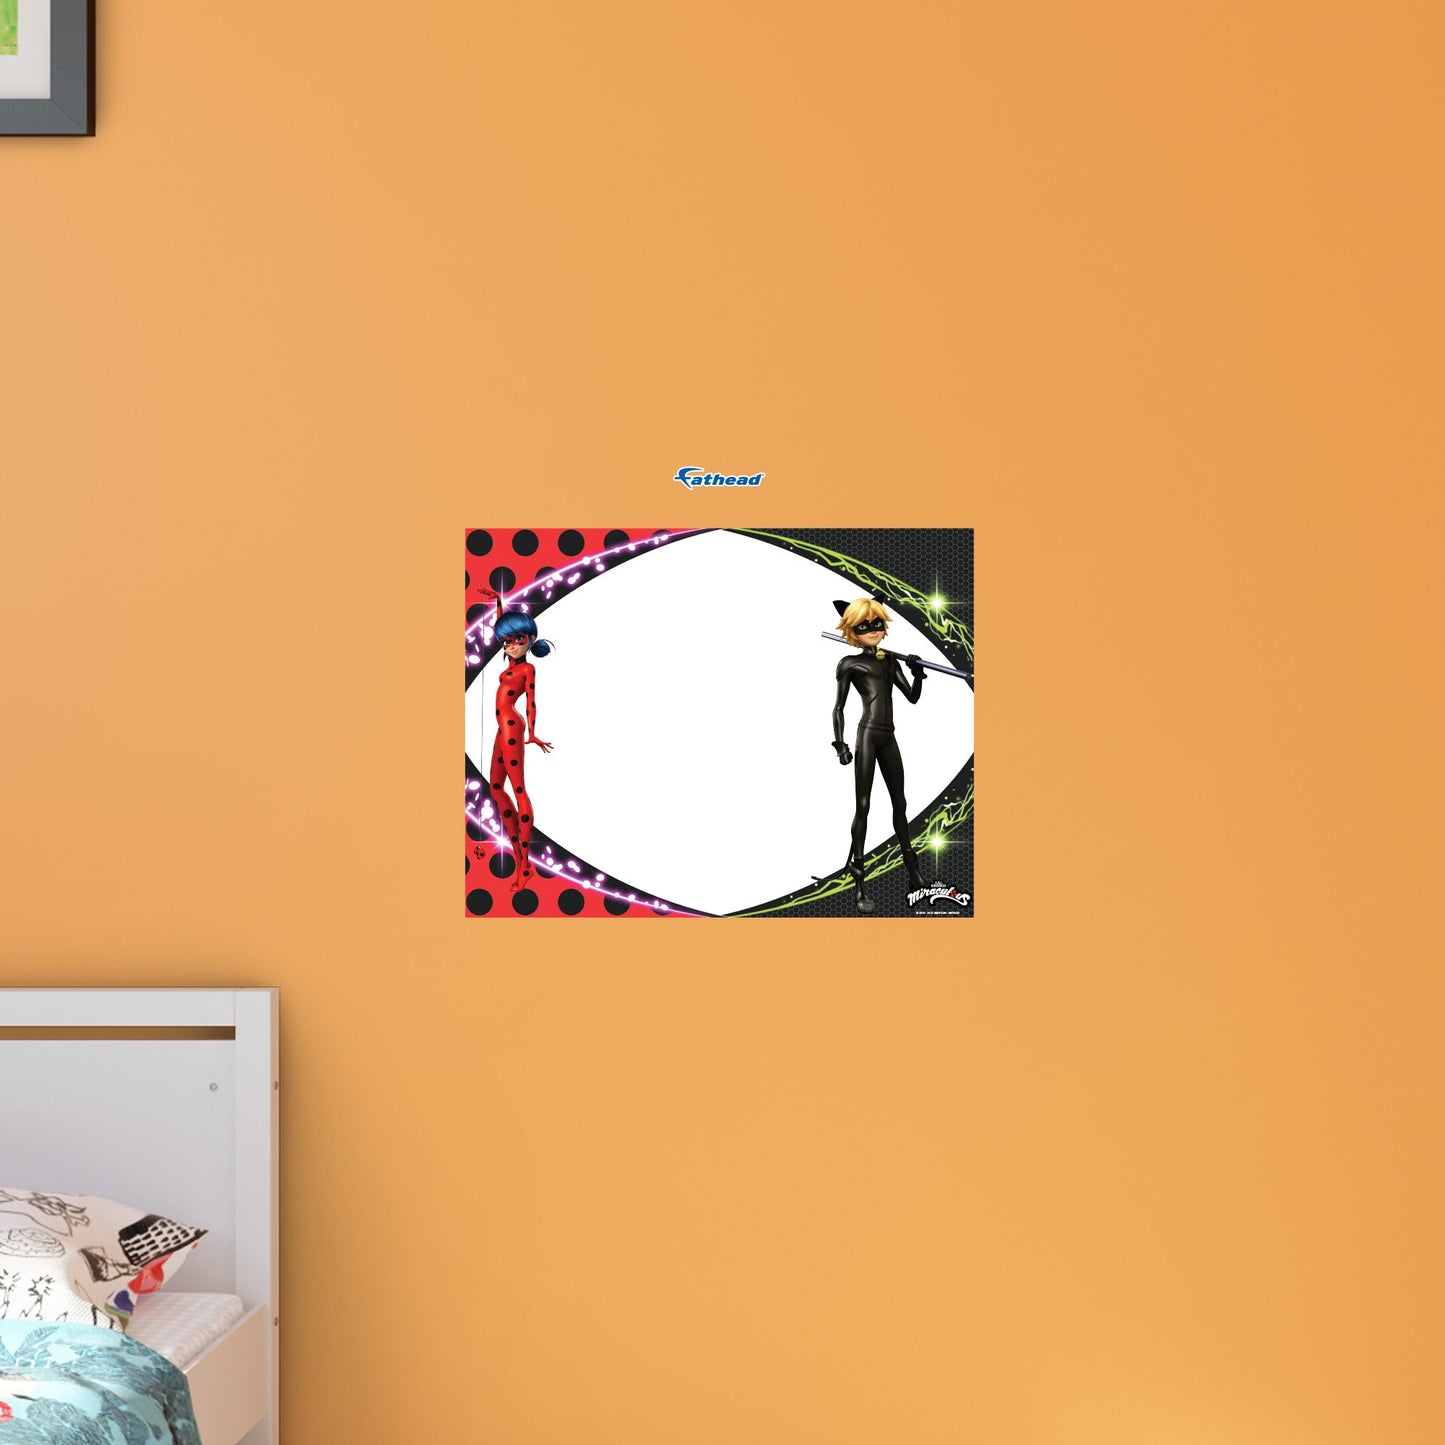 Miraculous: Cat Noir and Ladybug Lucky and Charming Dry Erase        -   Removable     Adhesive Decal